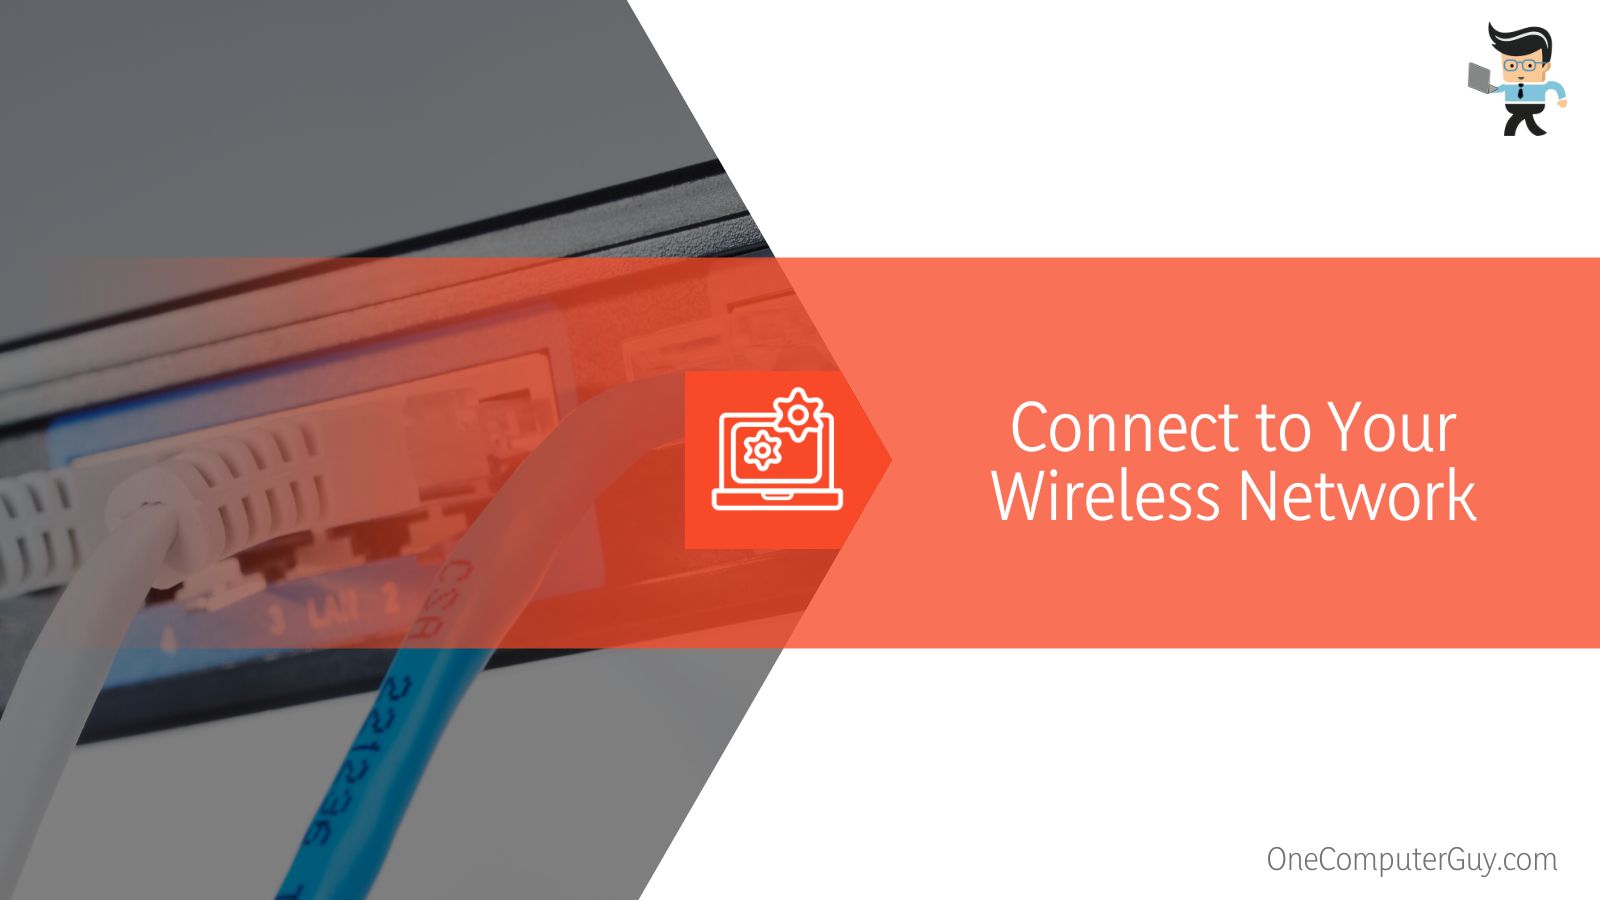 Connect to Your Wireless Network